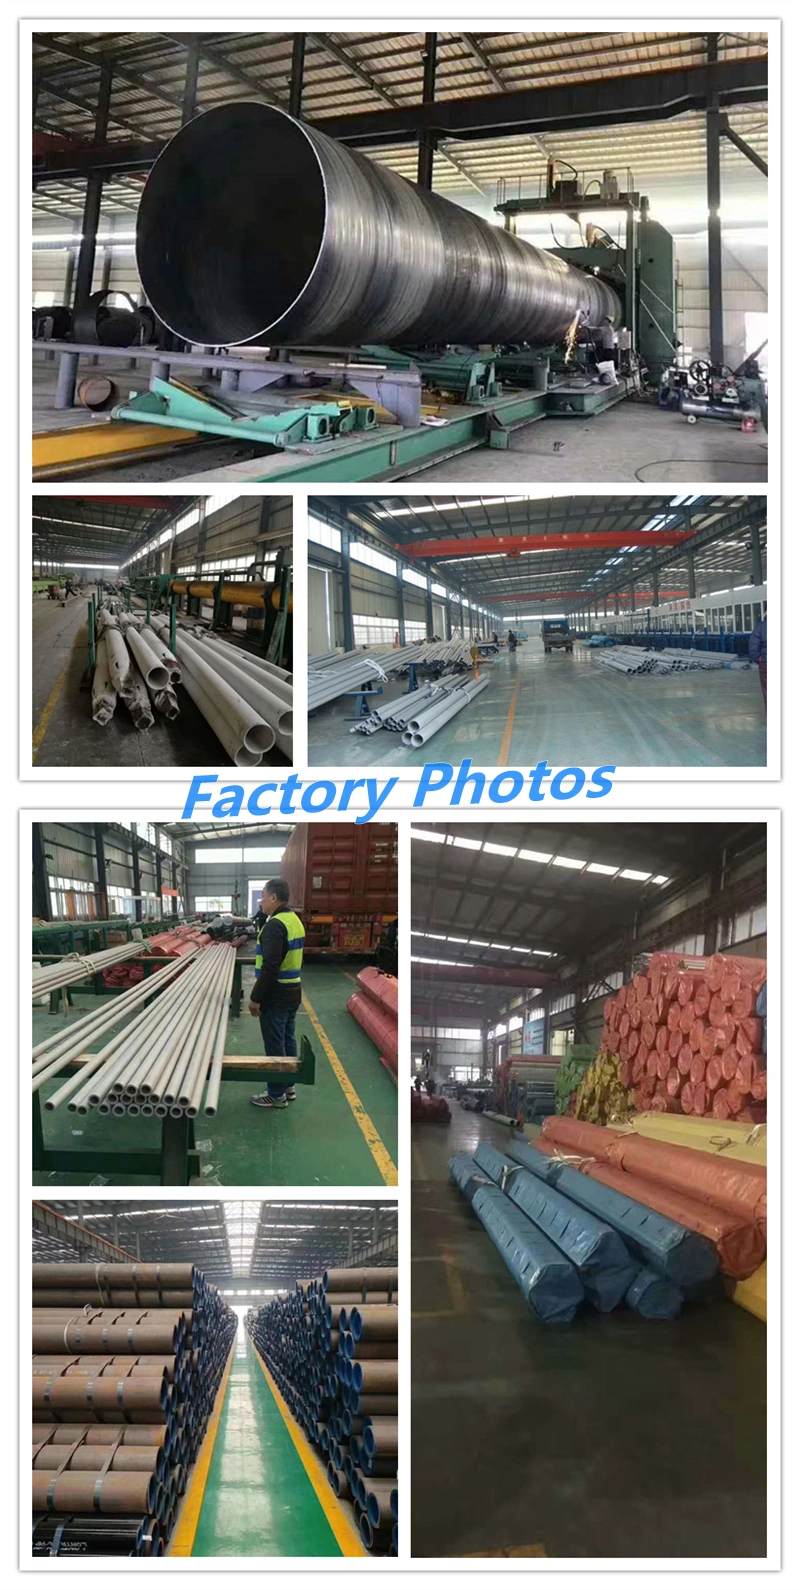 Straight Seam Welded Pipe BS 1387 CS Pipe for Building Material